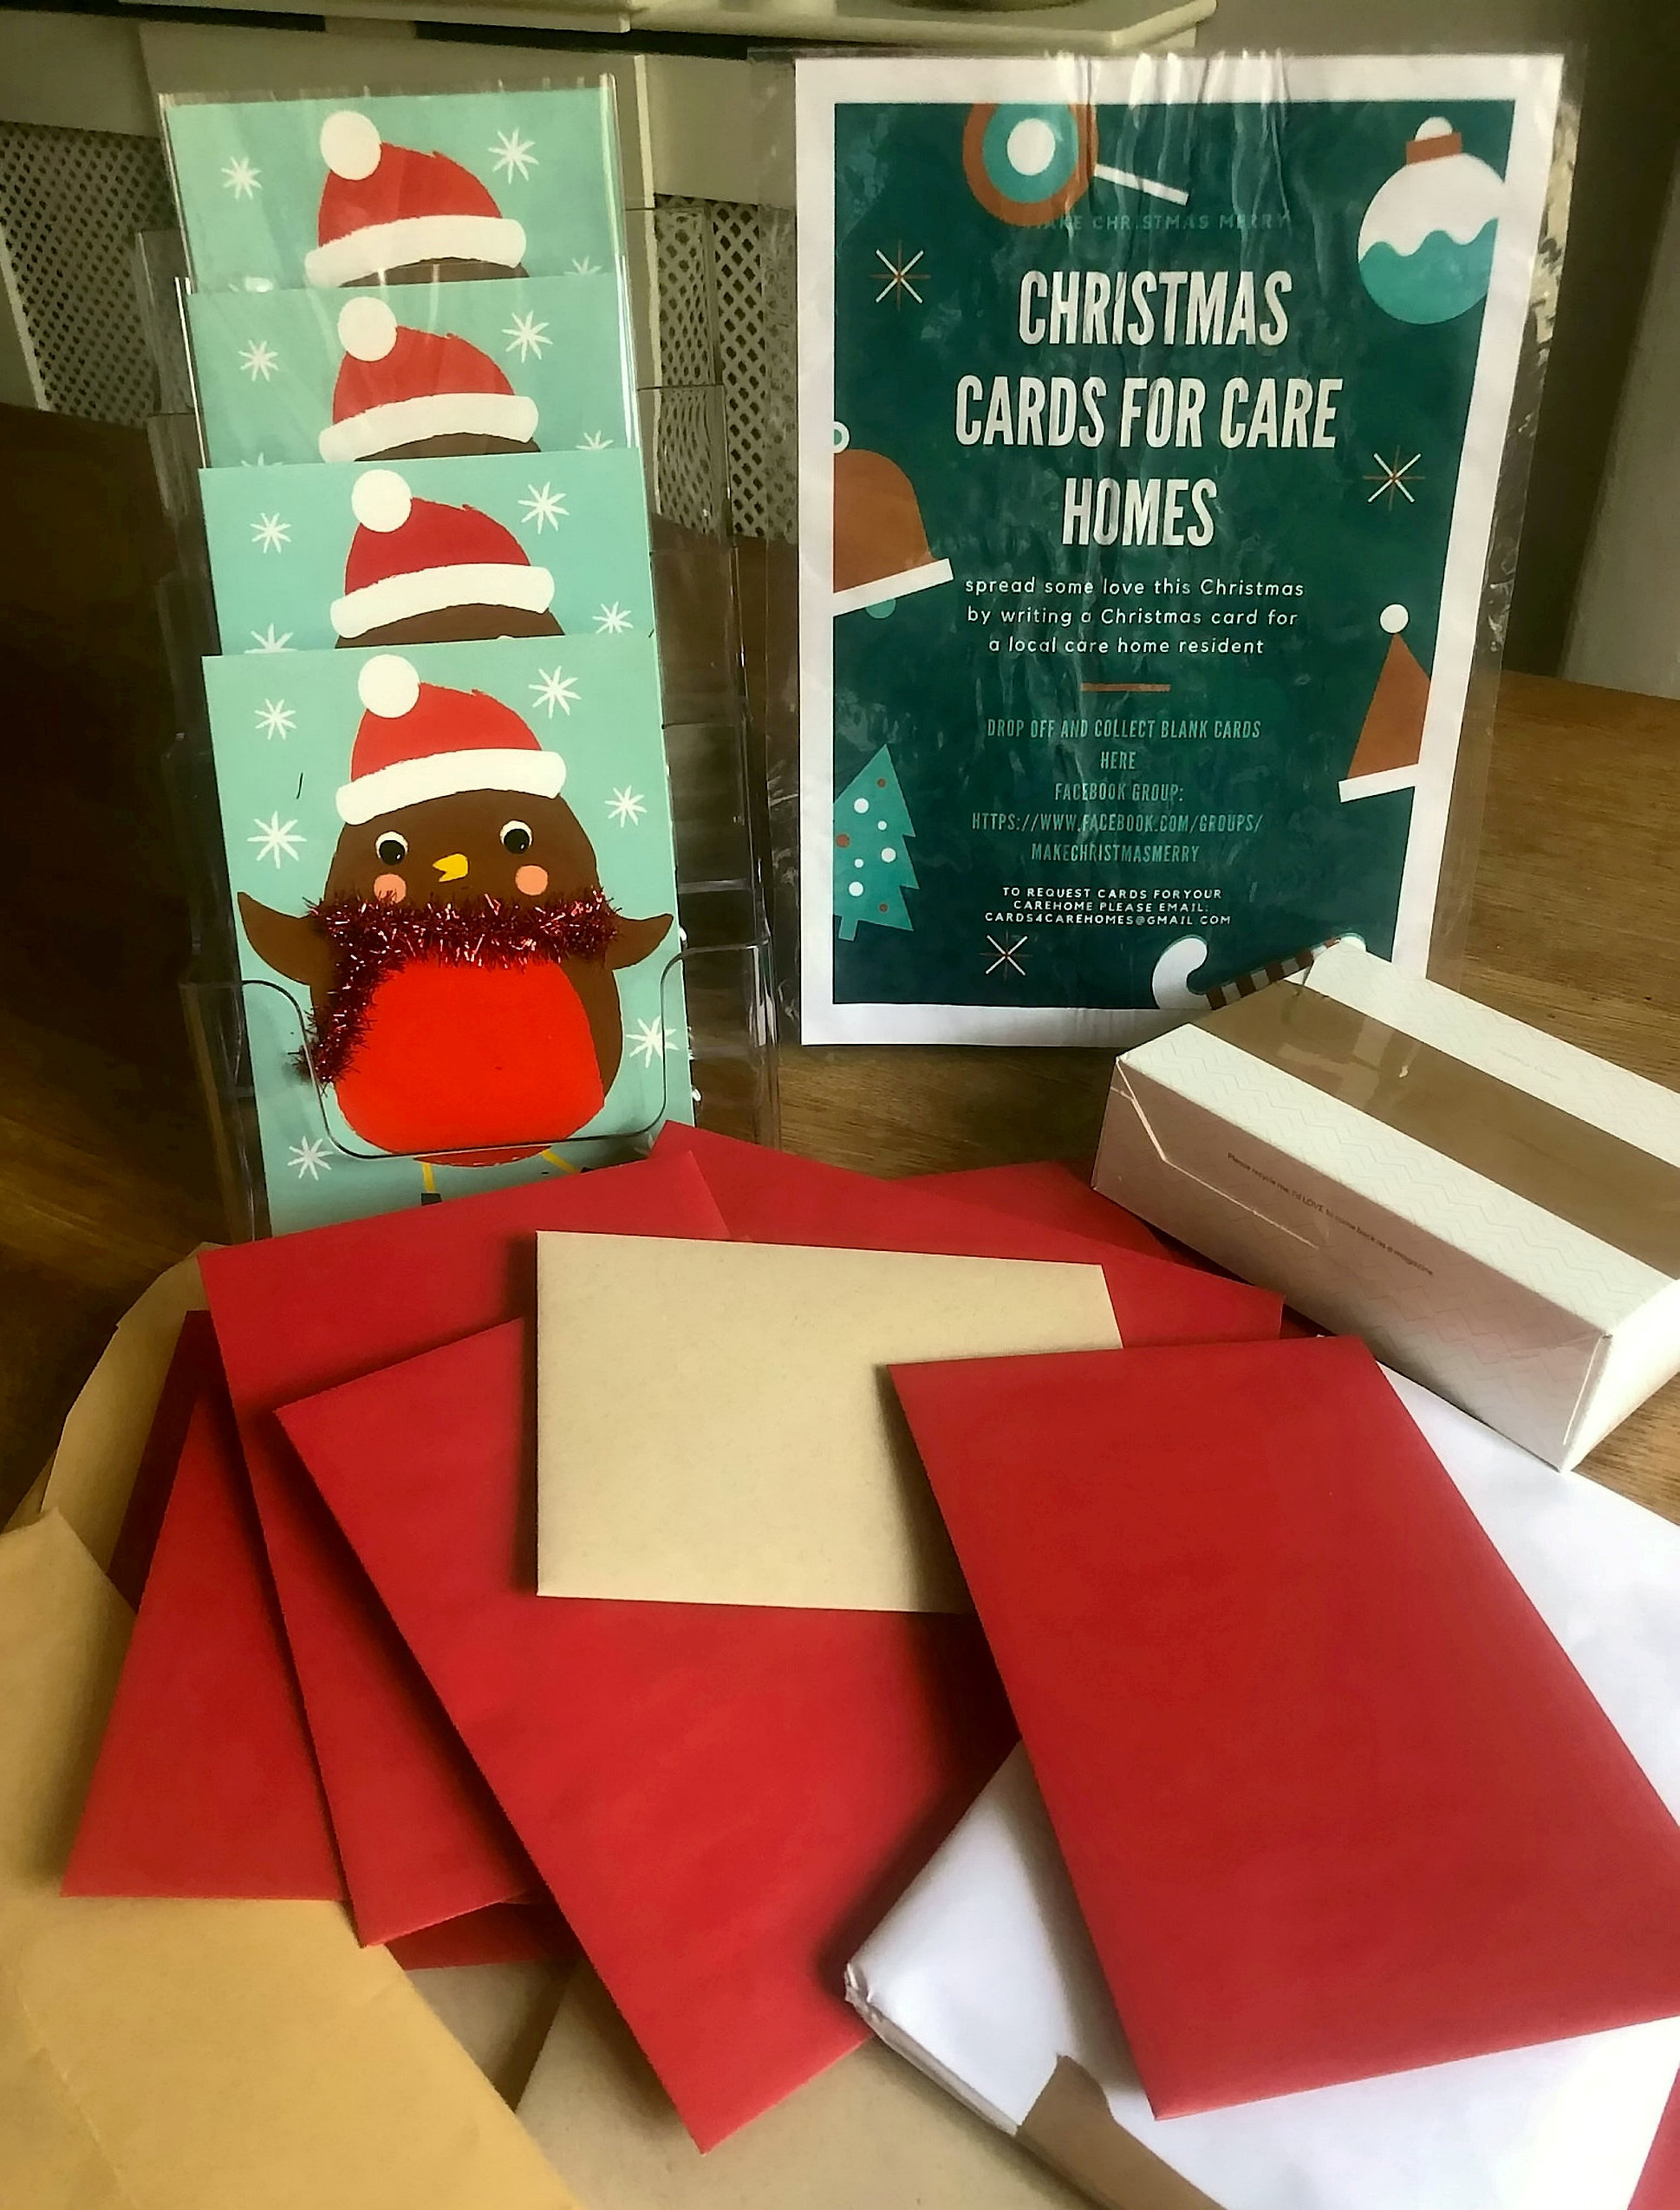 Andrea is planning on sending hundreds of Christmas cards to care home residents.